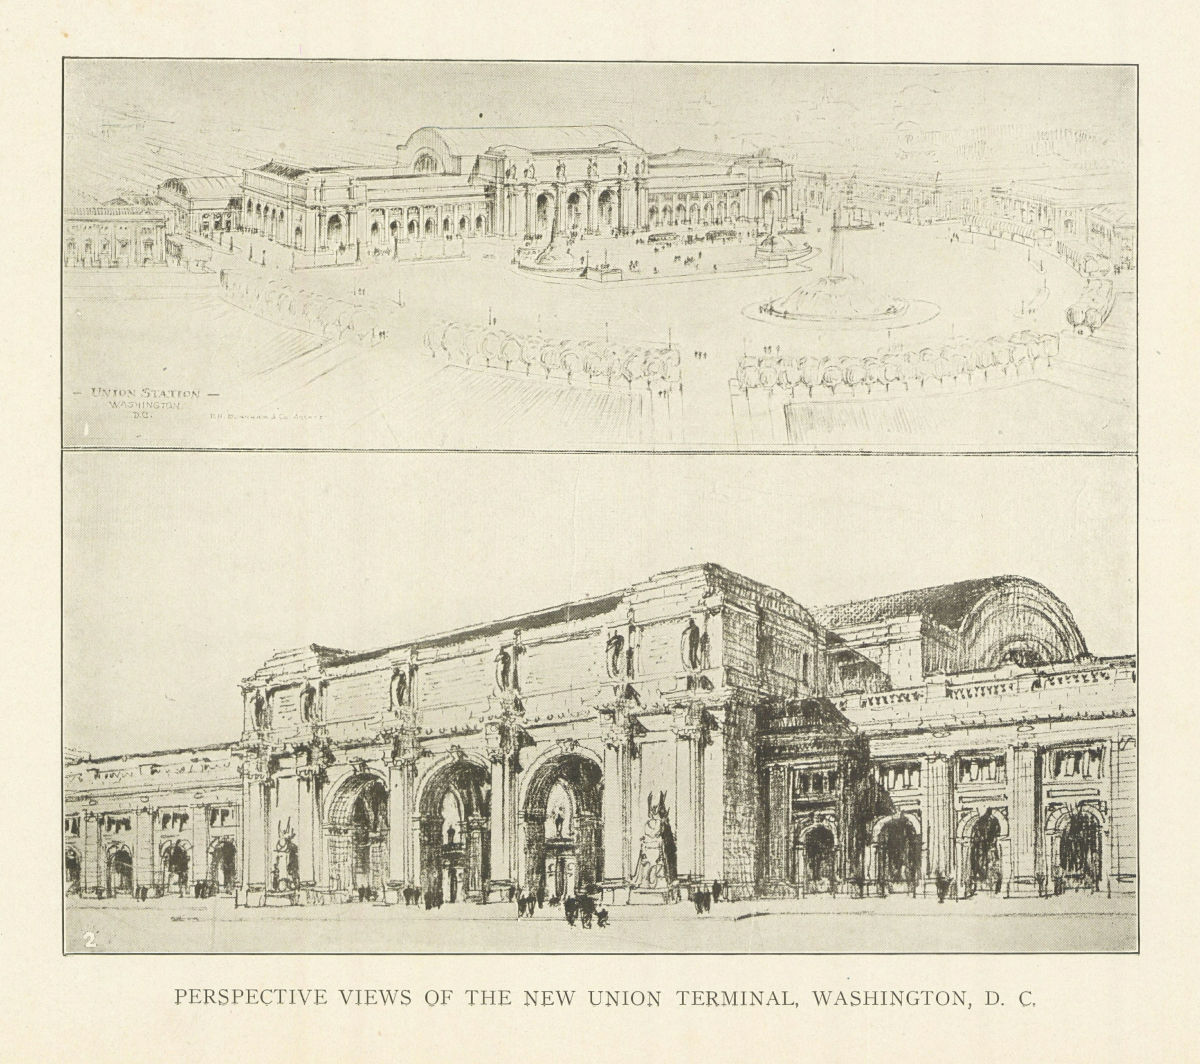 Associate Product Perspective Views of The New Union Terminal, Washington, D. C. 1907 old print